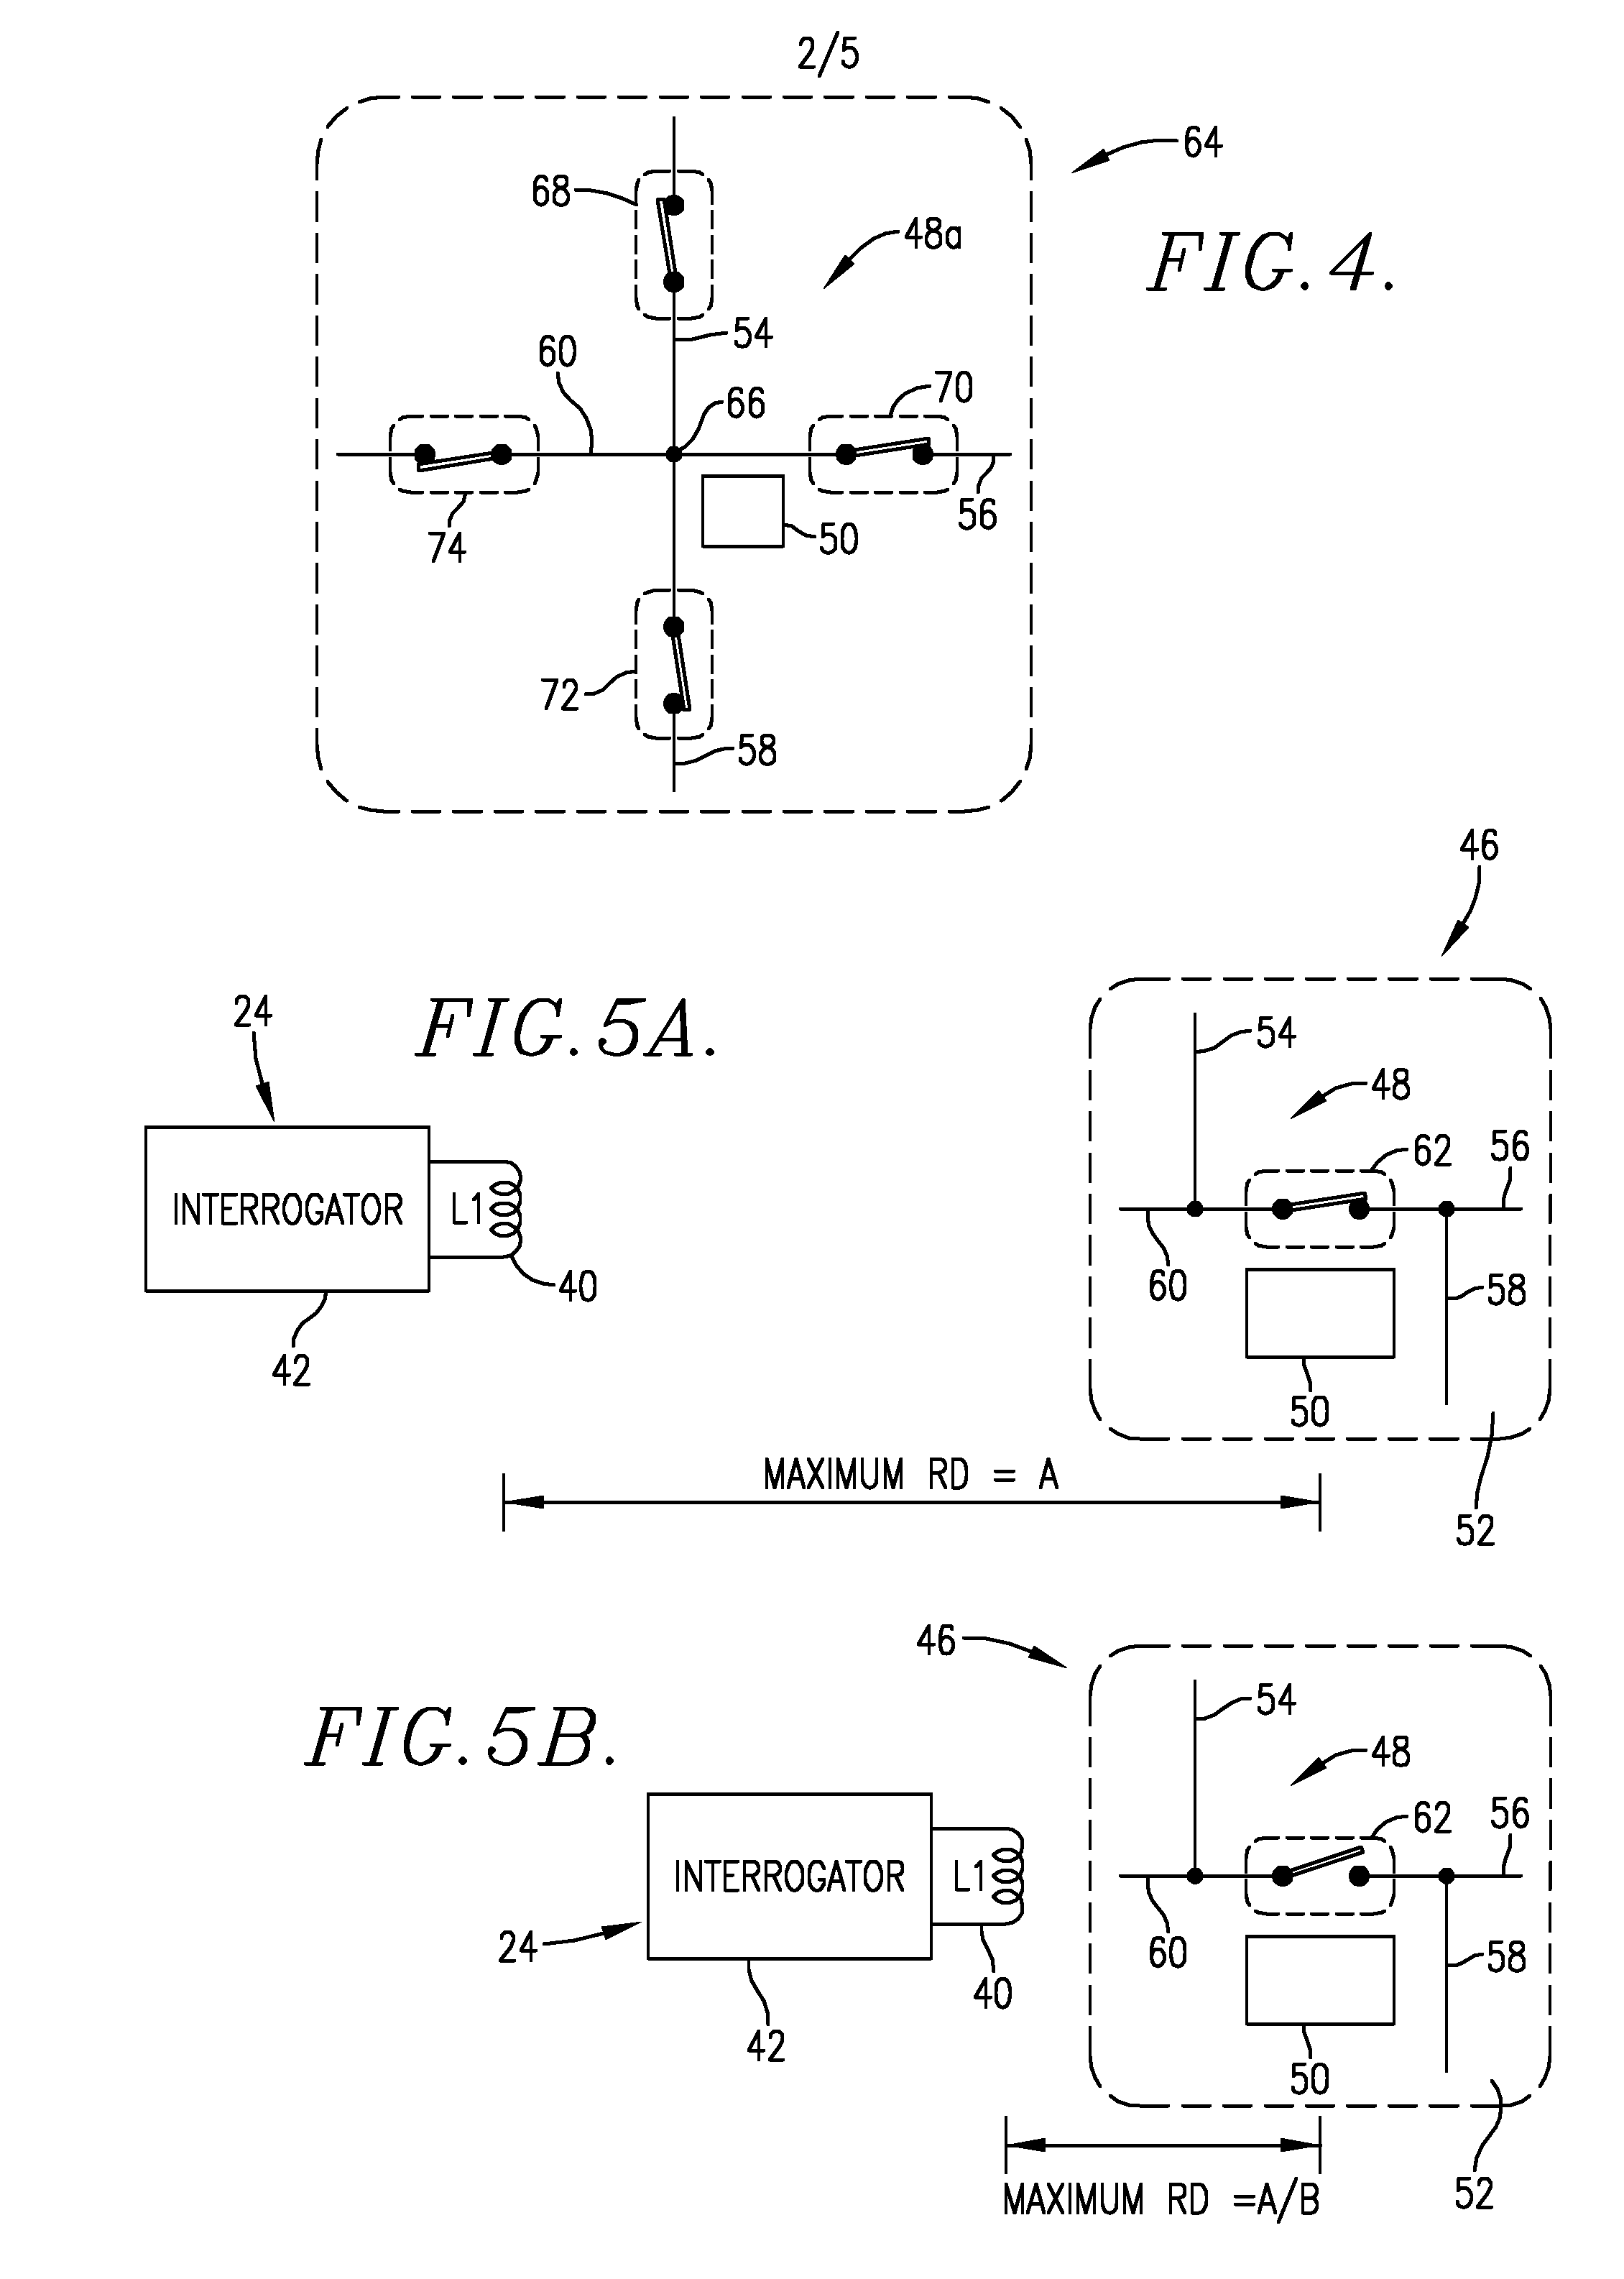 Temperature measurement system employing an electromagnetic transponder and separate impedance-changing parasitic antenna